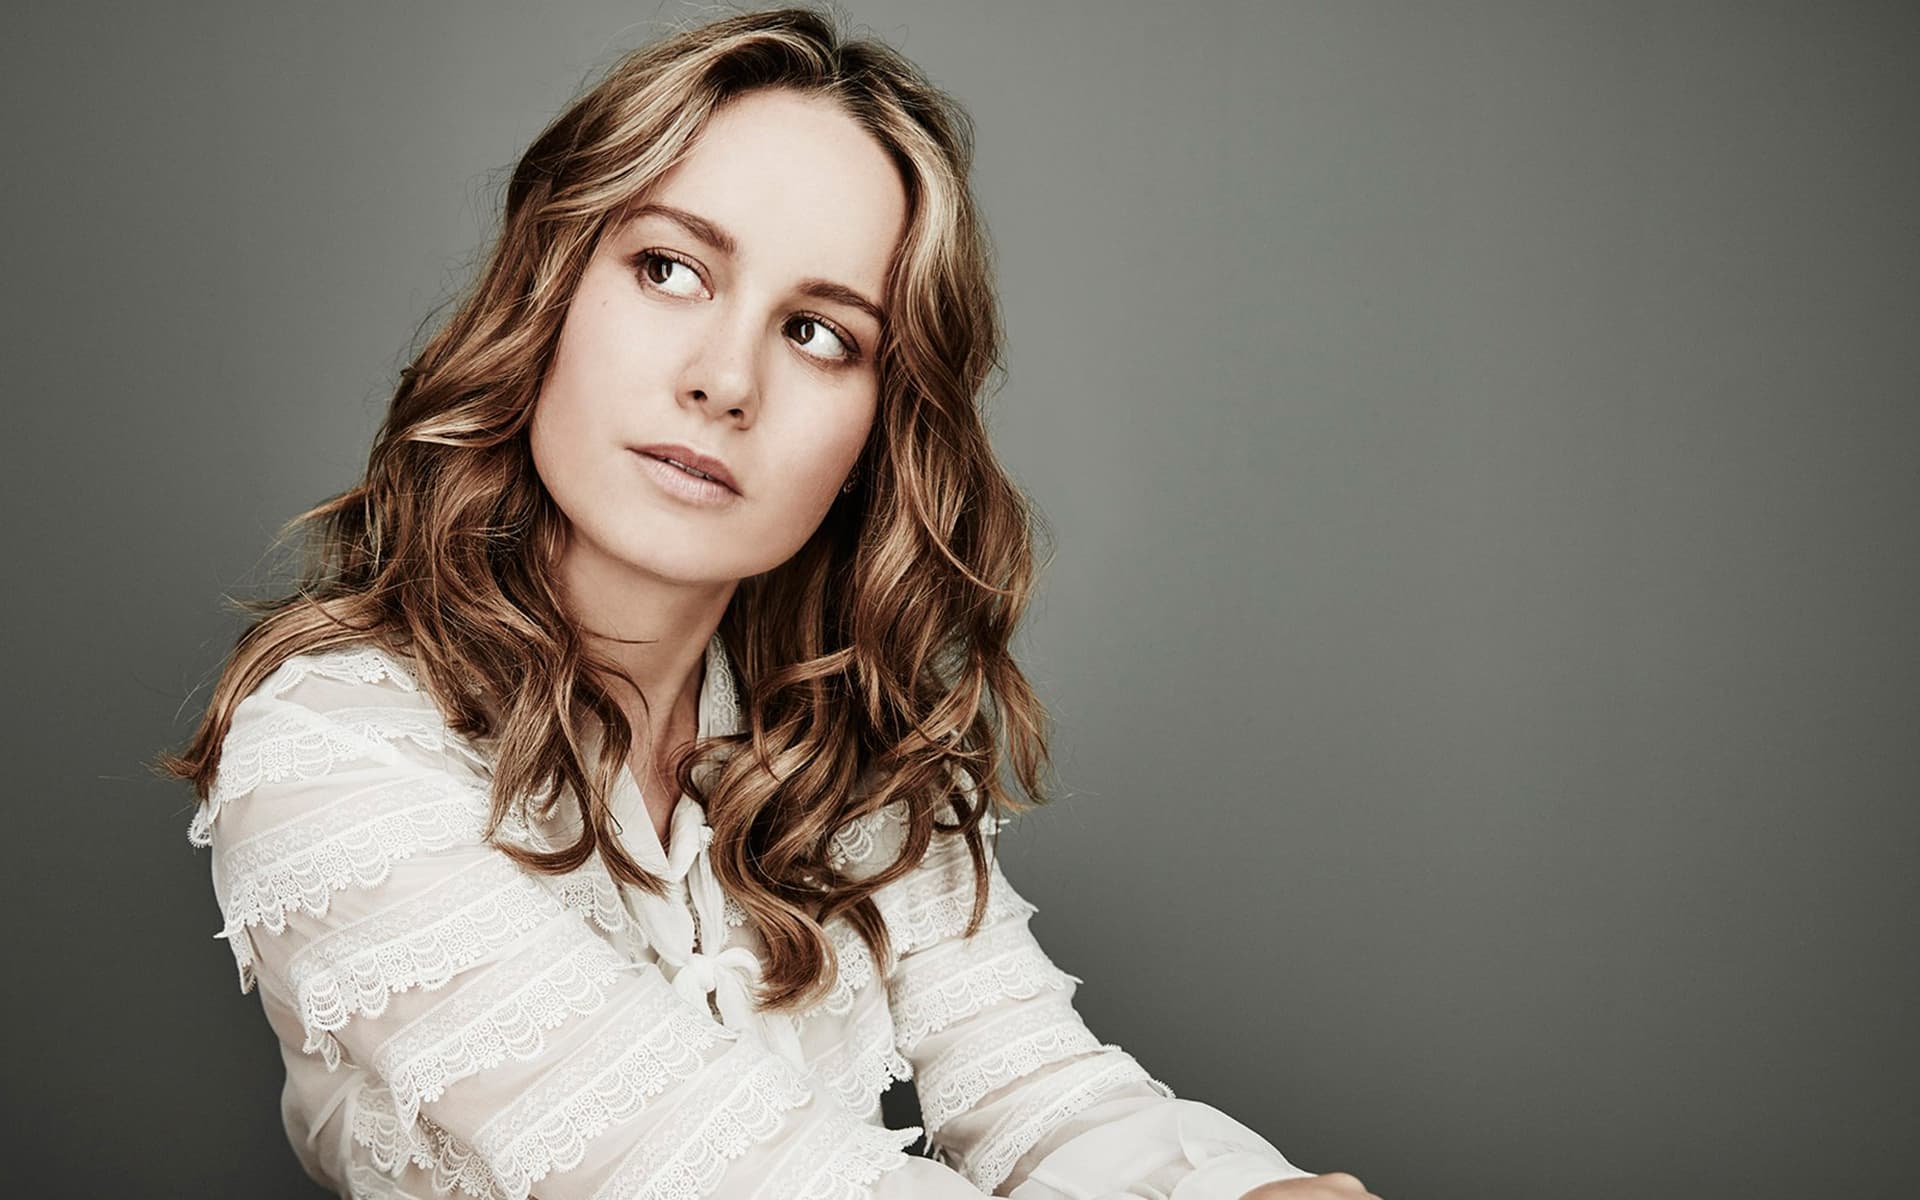 Brie Larson wallpaper High Quality Resolution Download